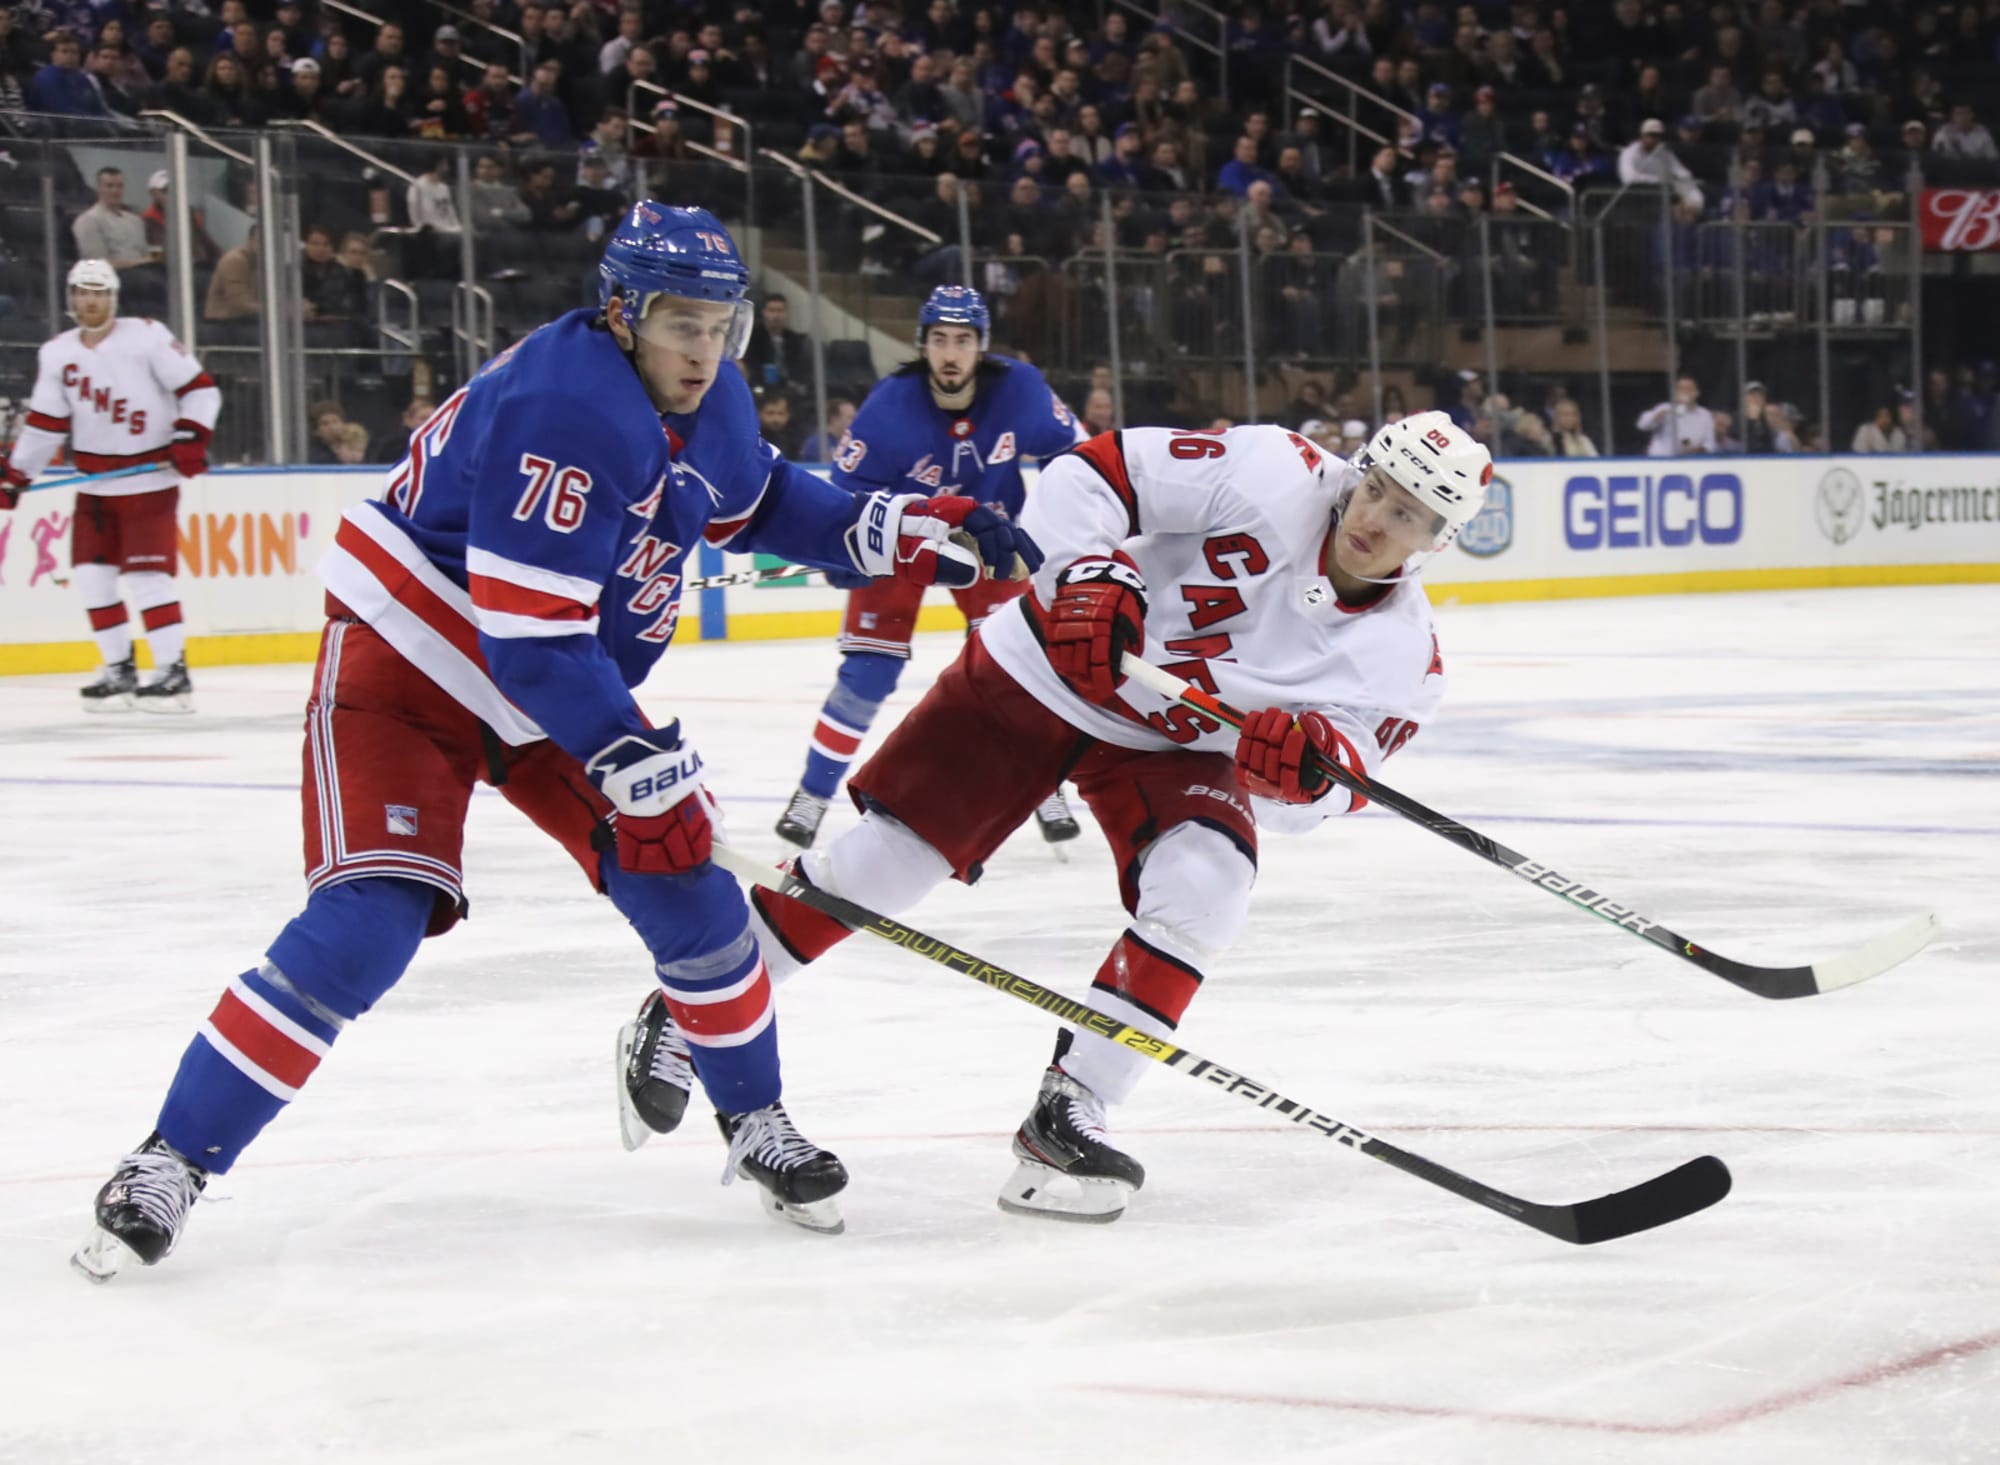 New York Rangers A game with the playoffs in the balance